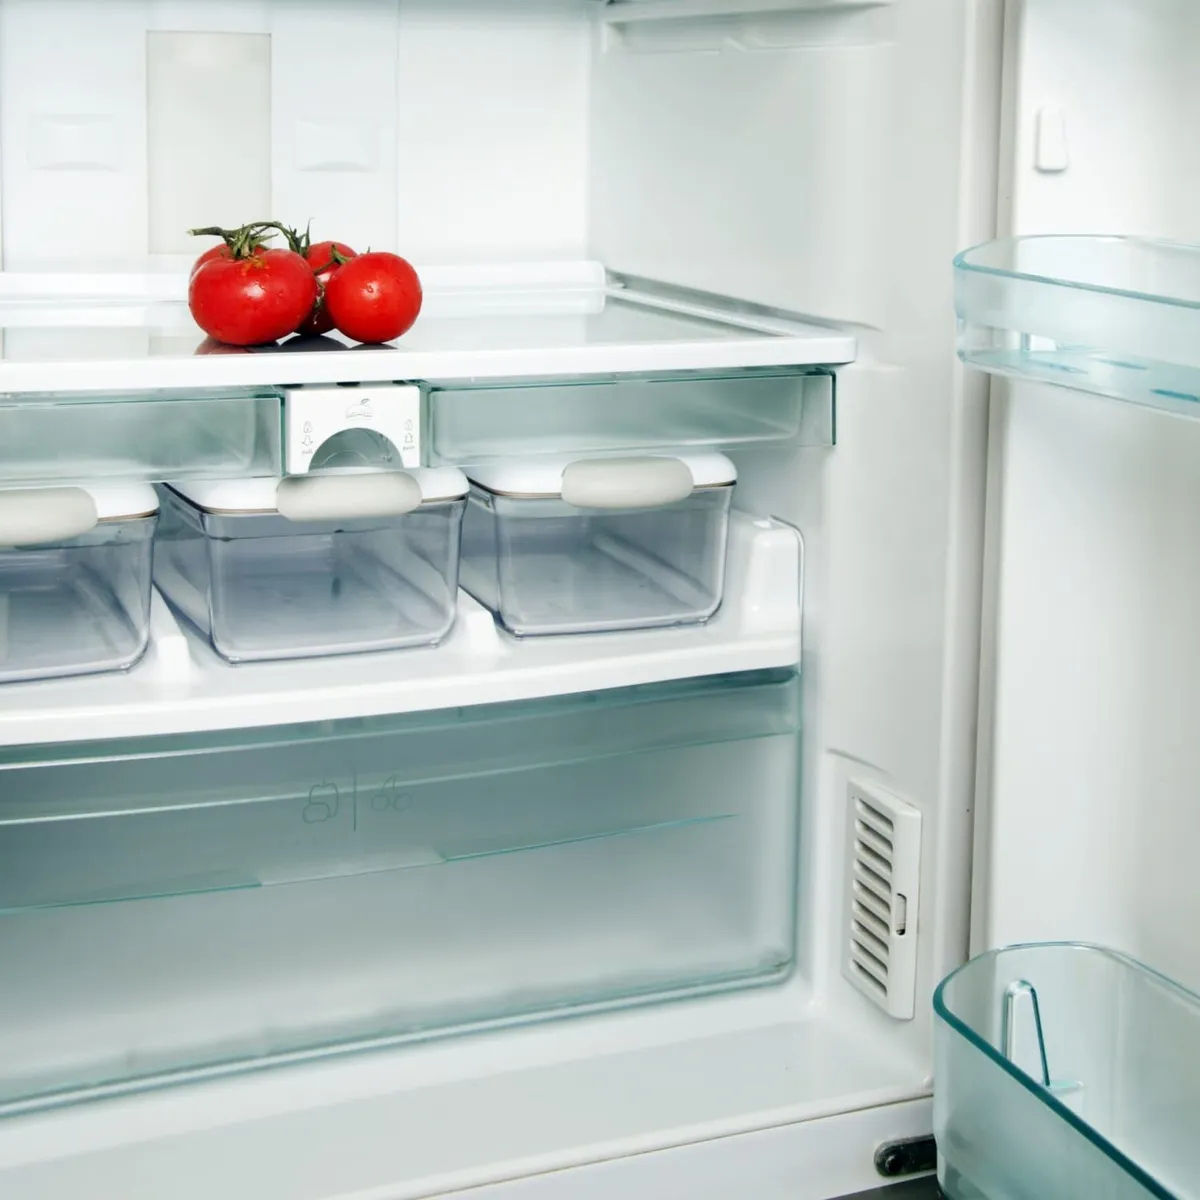 tomatoes should be stored in the fridge